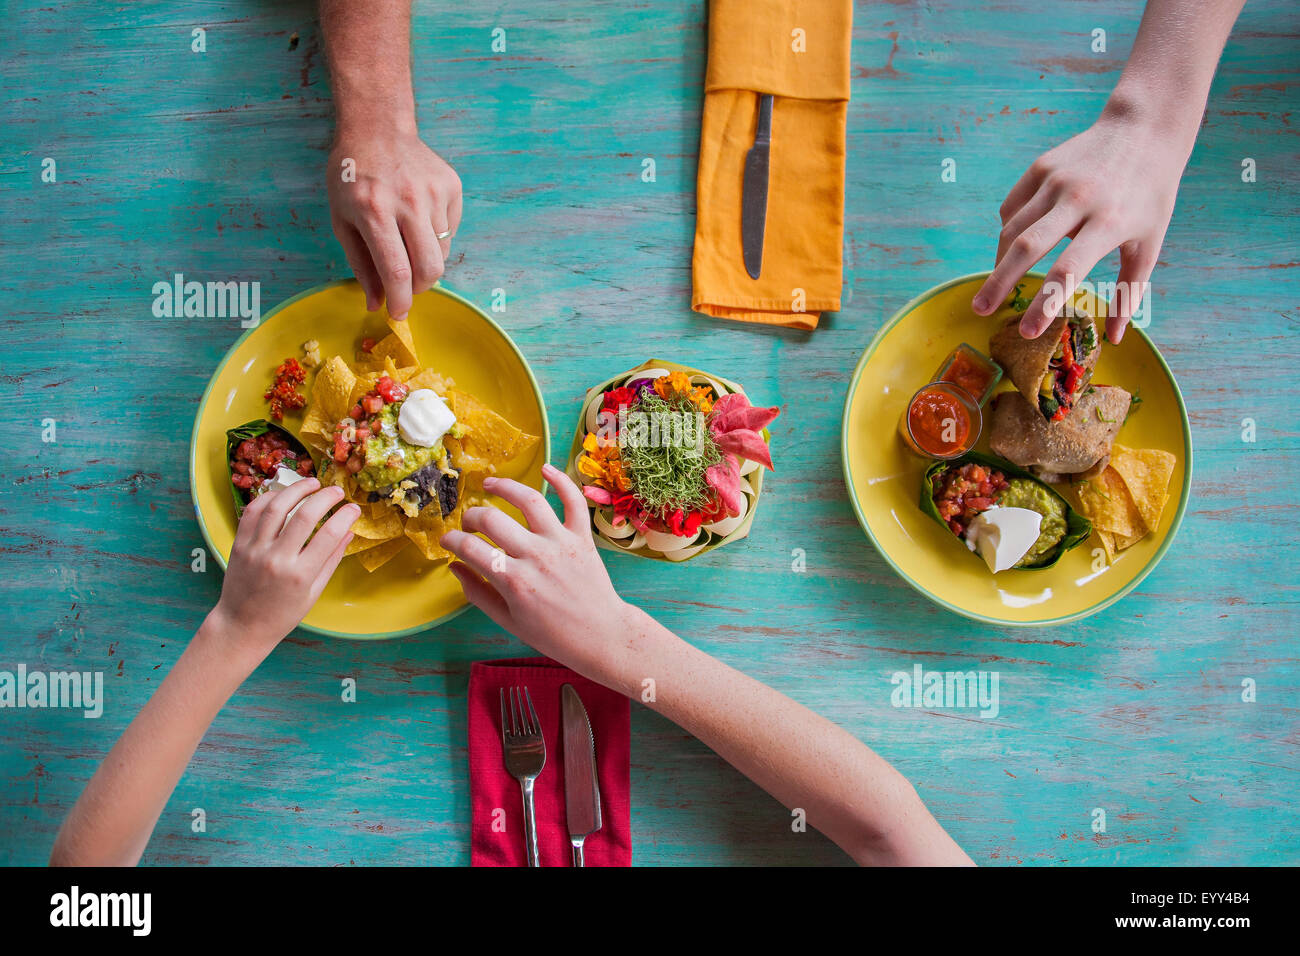 High angle view of hands reaching for food on plates Stock Photo